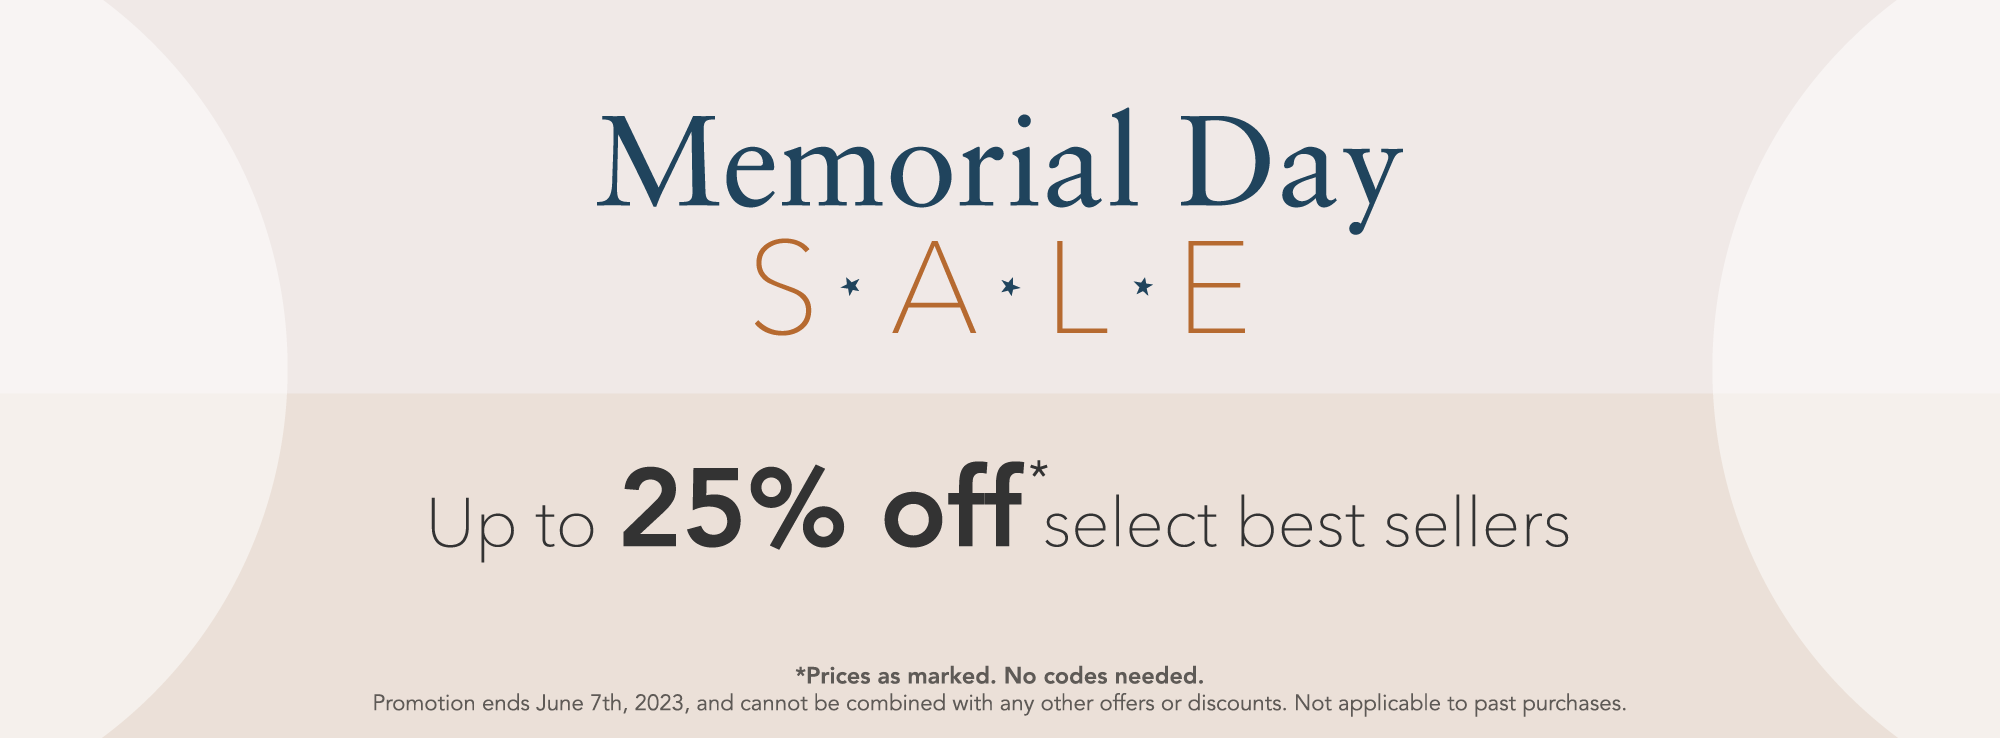 Memorial Day Sale - Up to 25% off select best sellers. Terms and conditions apply.